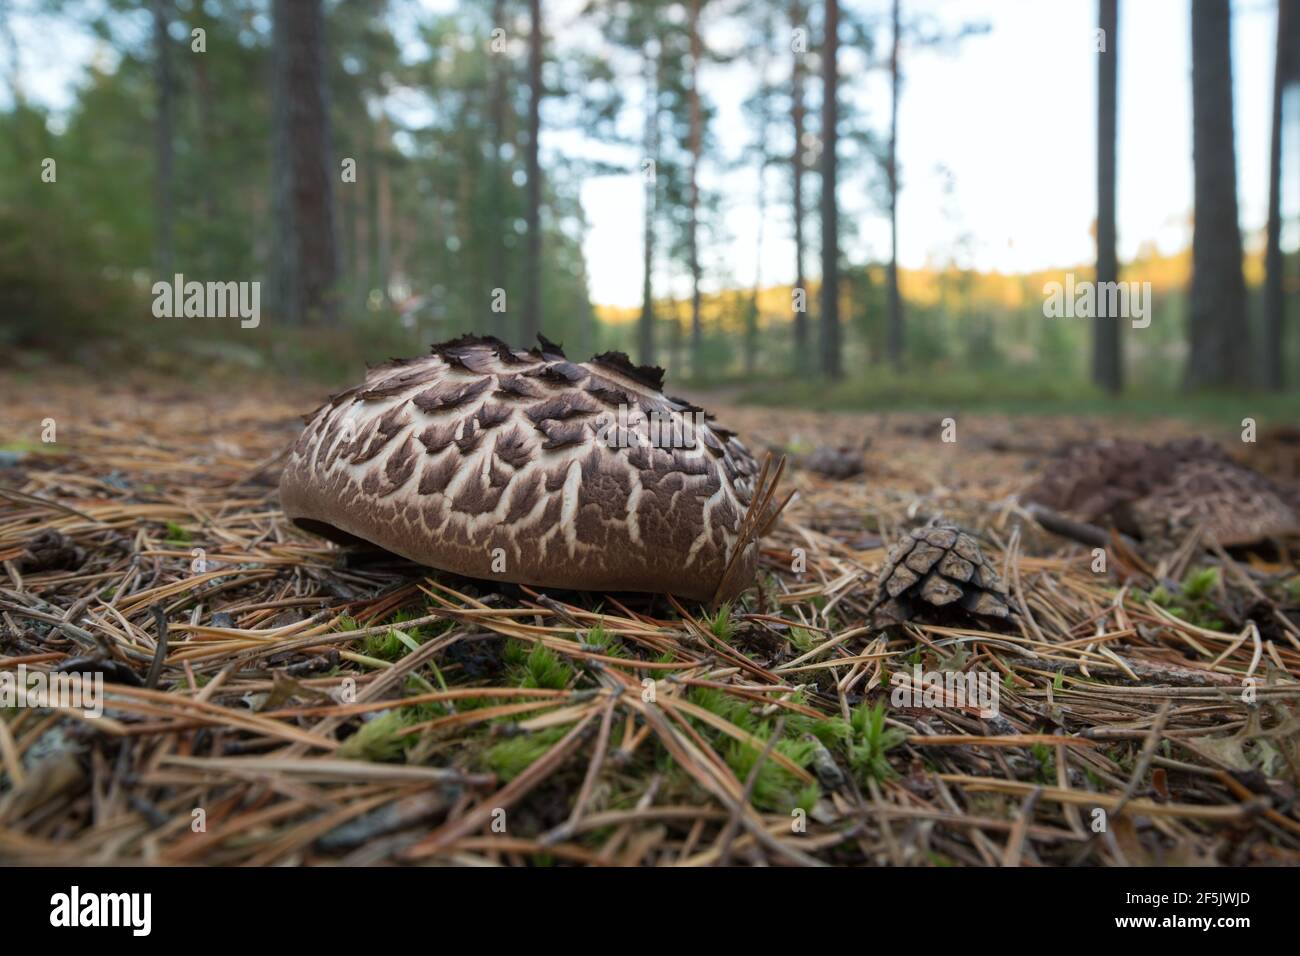 Scaly tooth fungus, Sarcodon squamosus growing in coniferous environmet Stock Photo